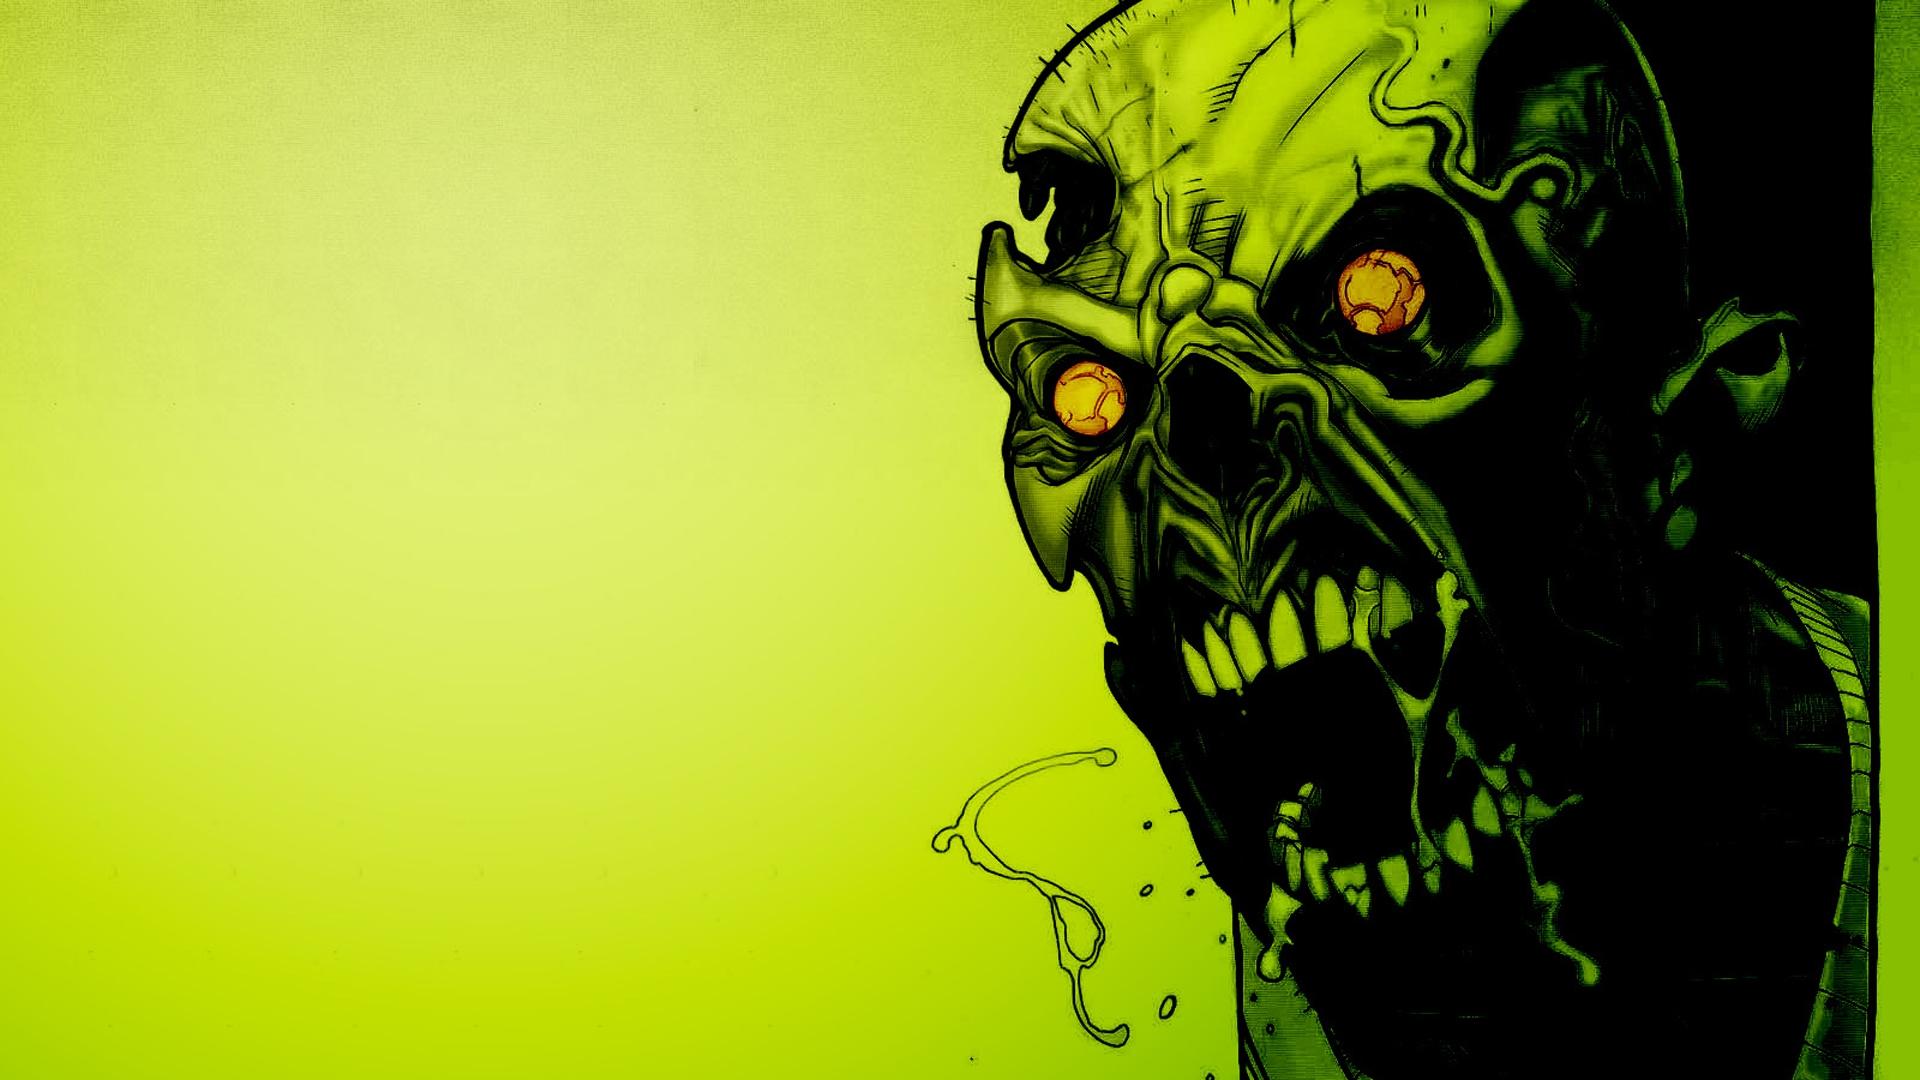 HD wallpaper, Artwork, Undead, Indoors, Zombies, Simple Background, Green Color